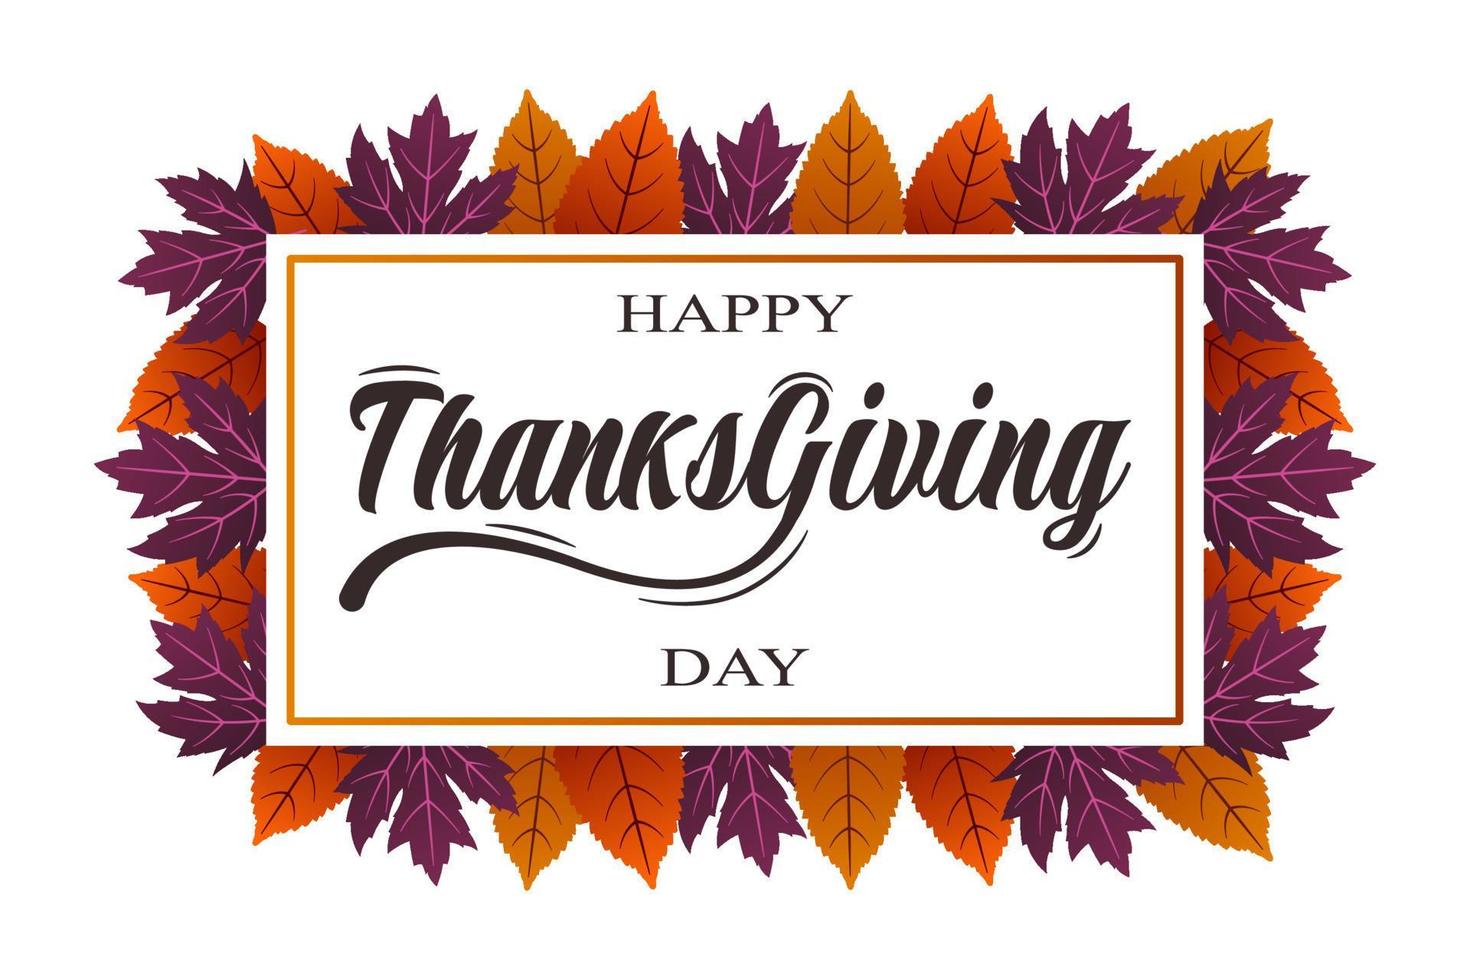 Calligraphy of Happy Thanksgiving Day with frame leaf autumn vector